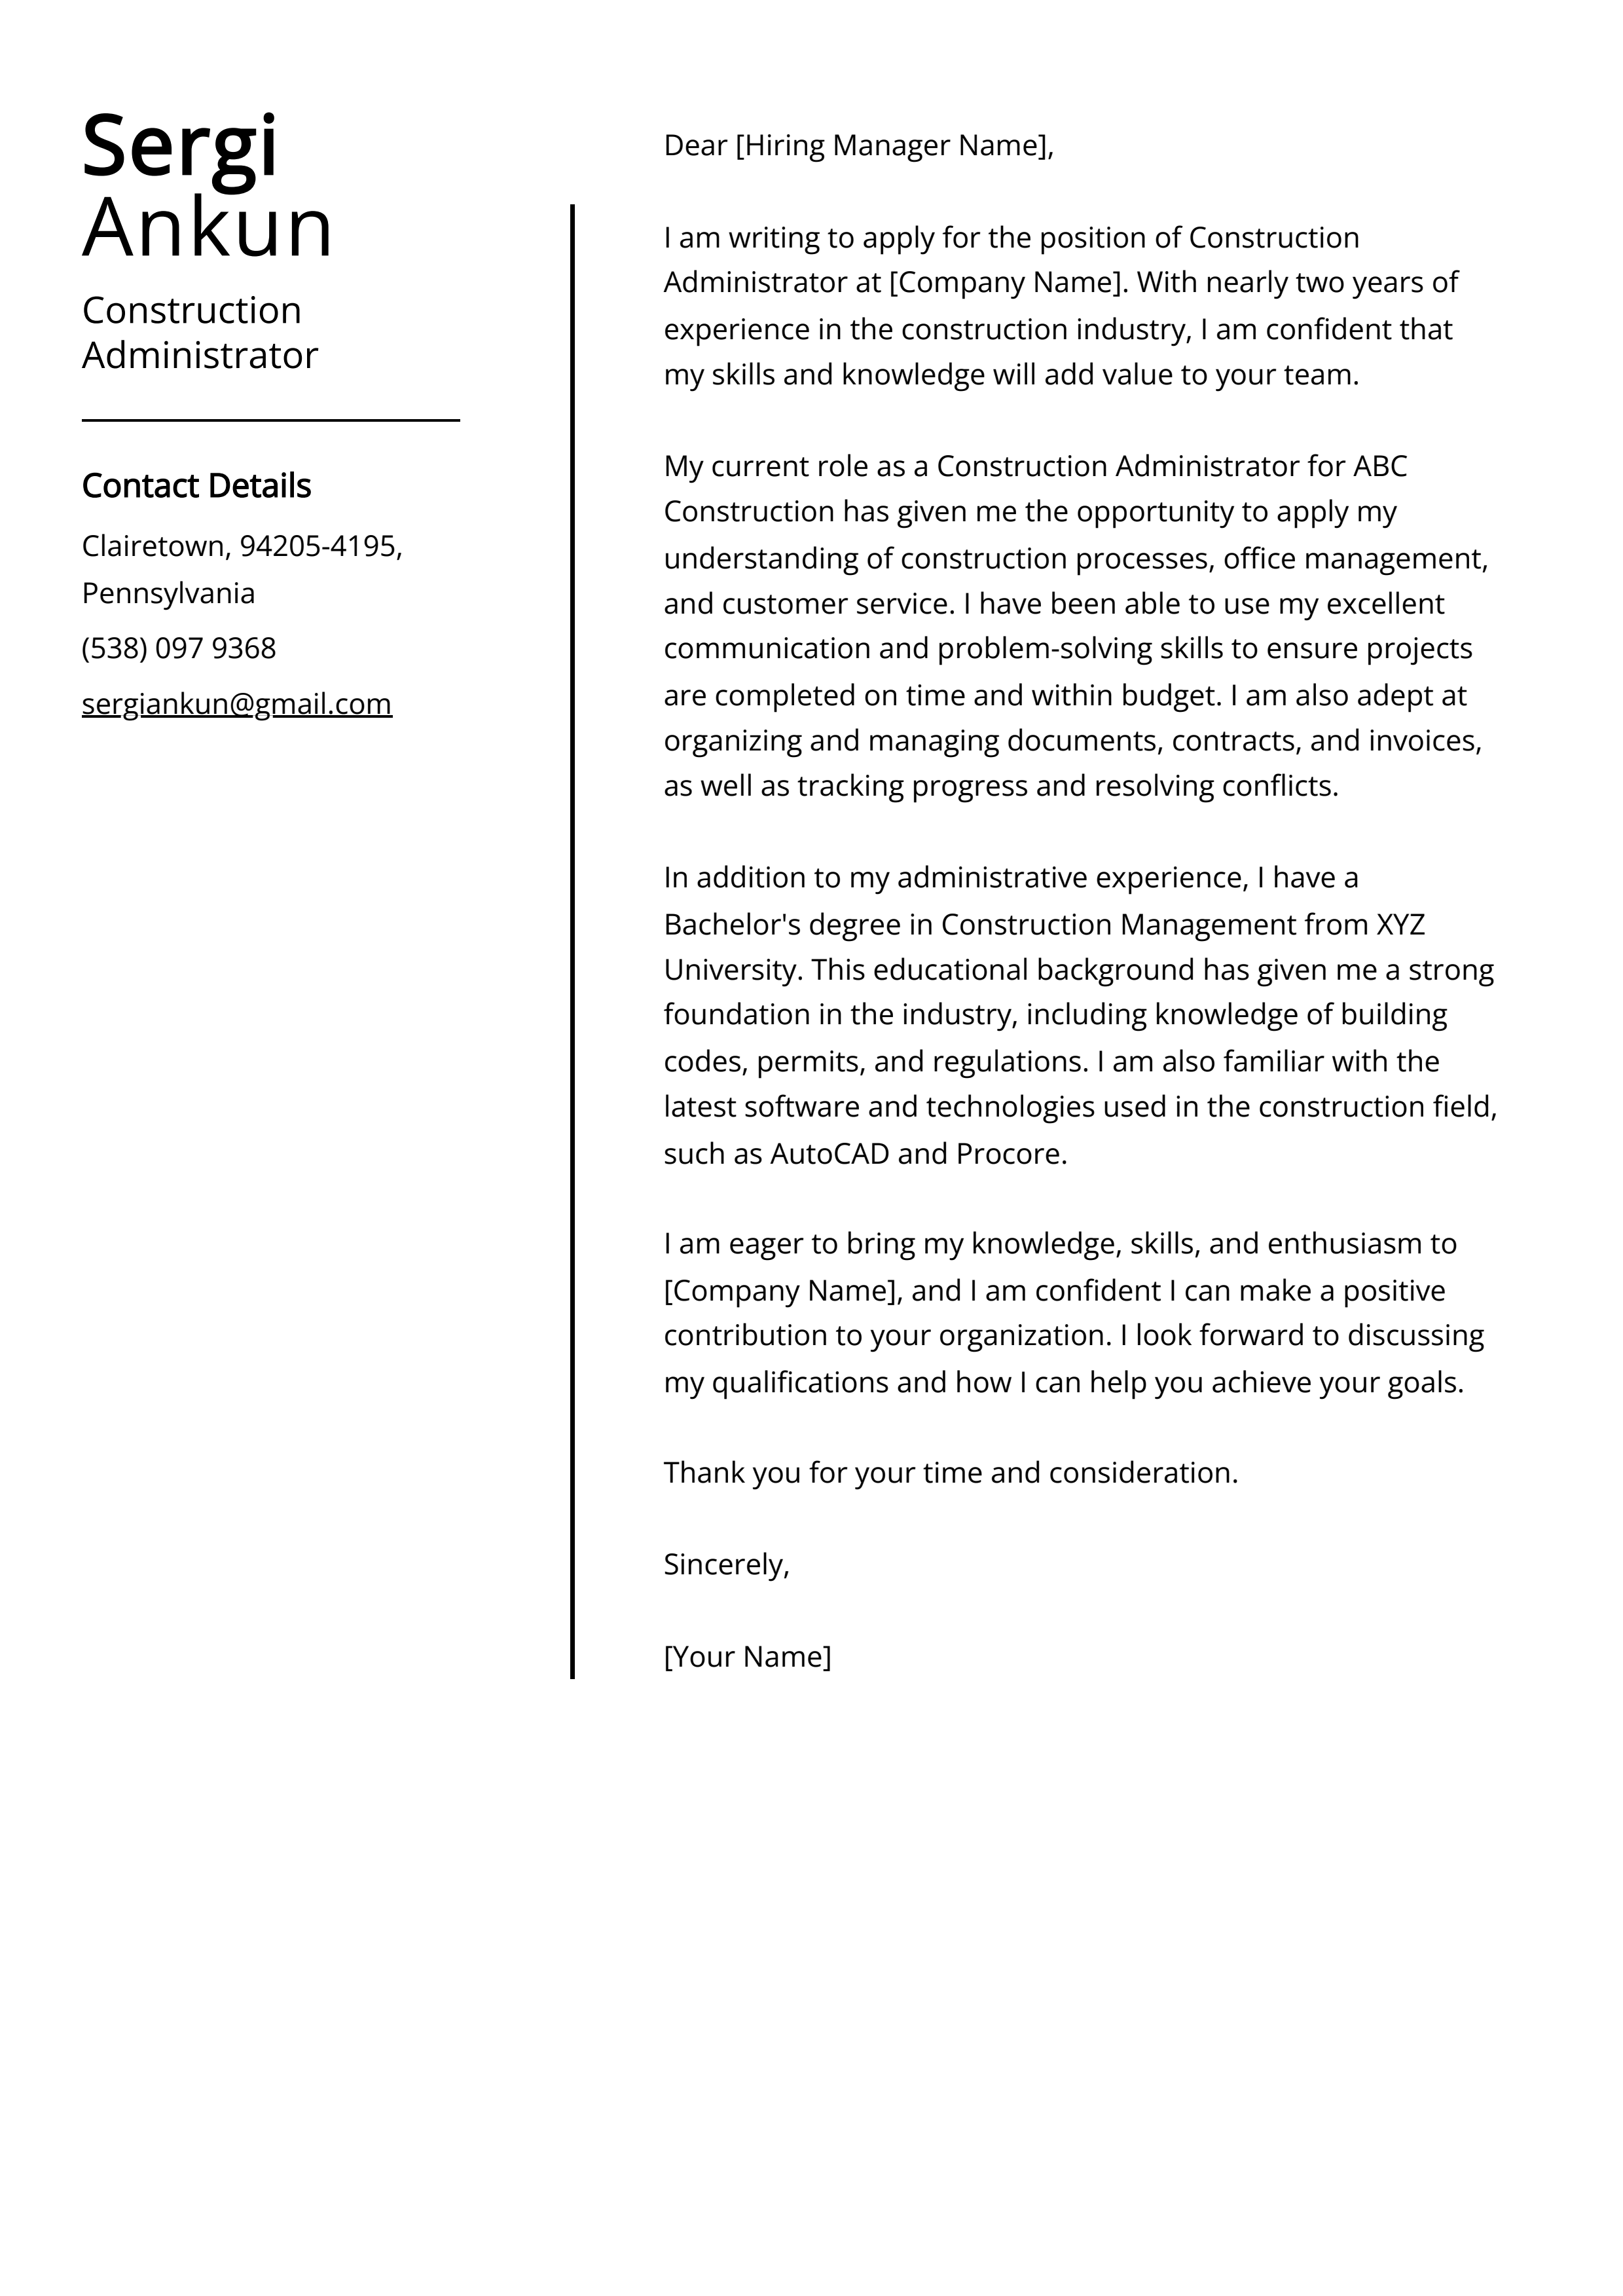 Construction Administrator Cover Letter Example